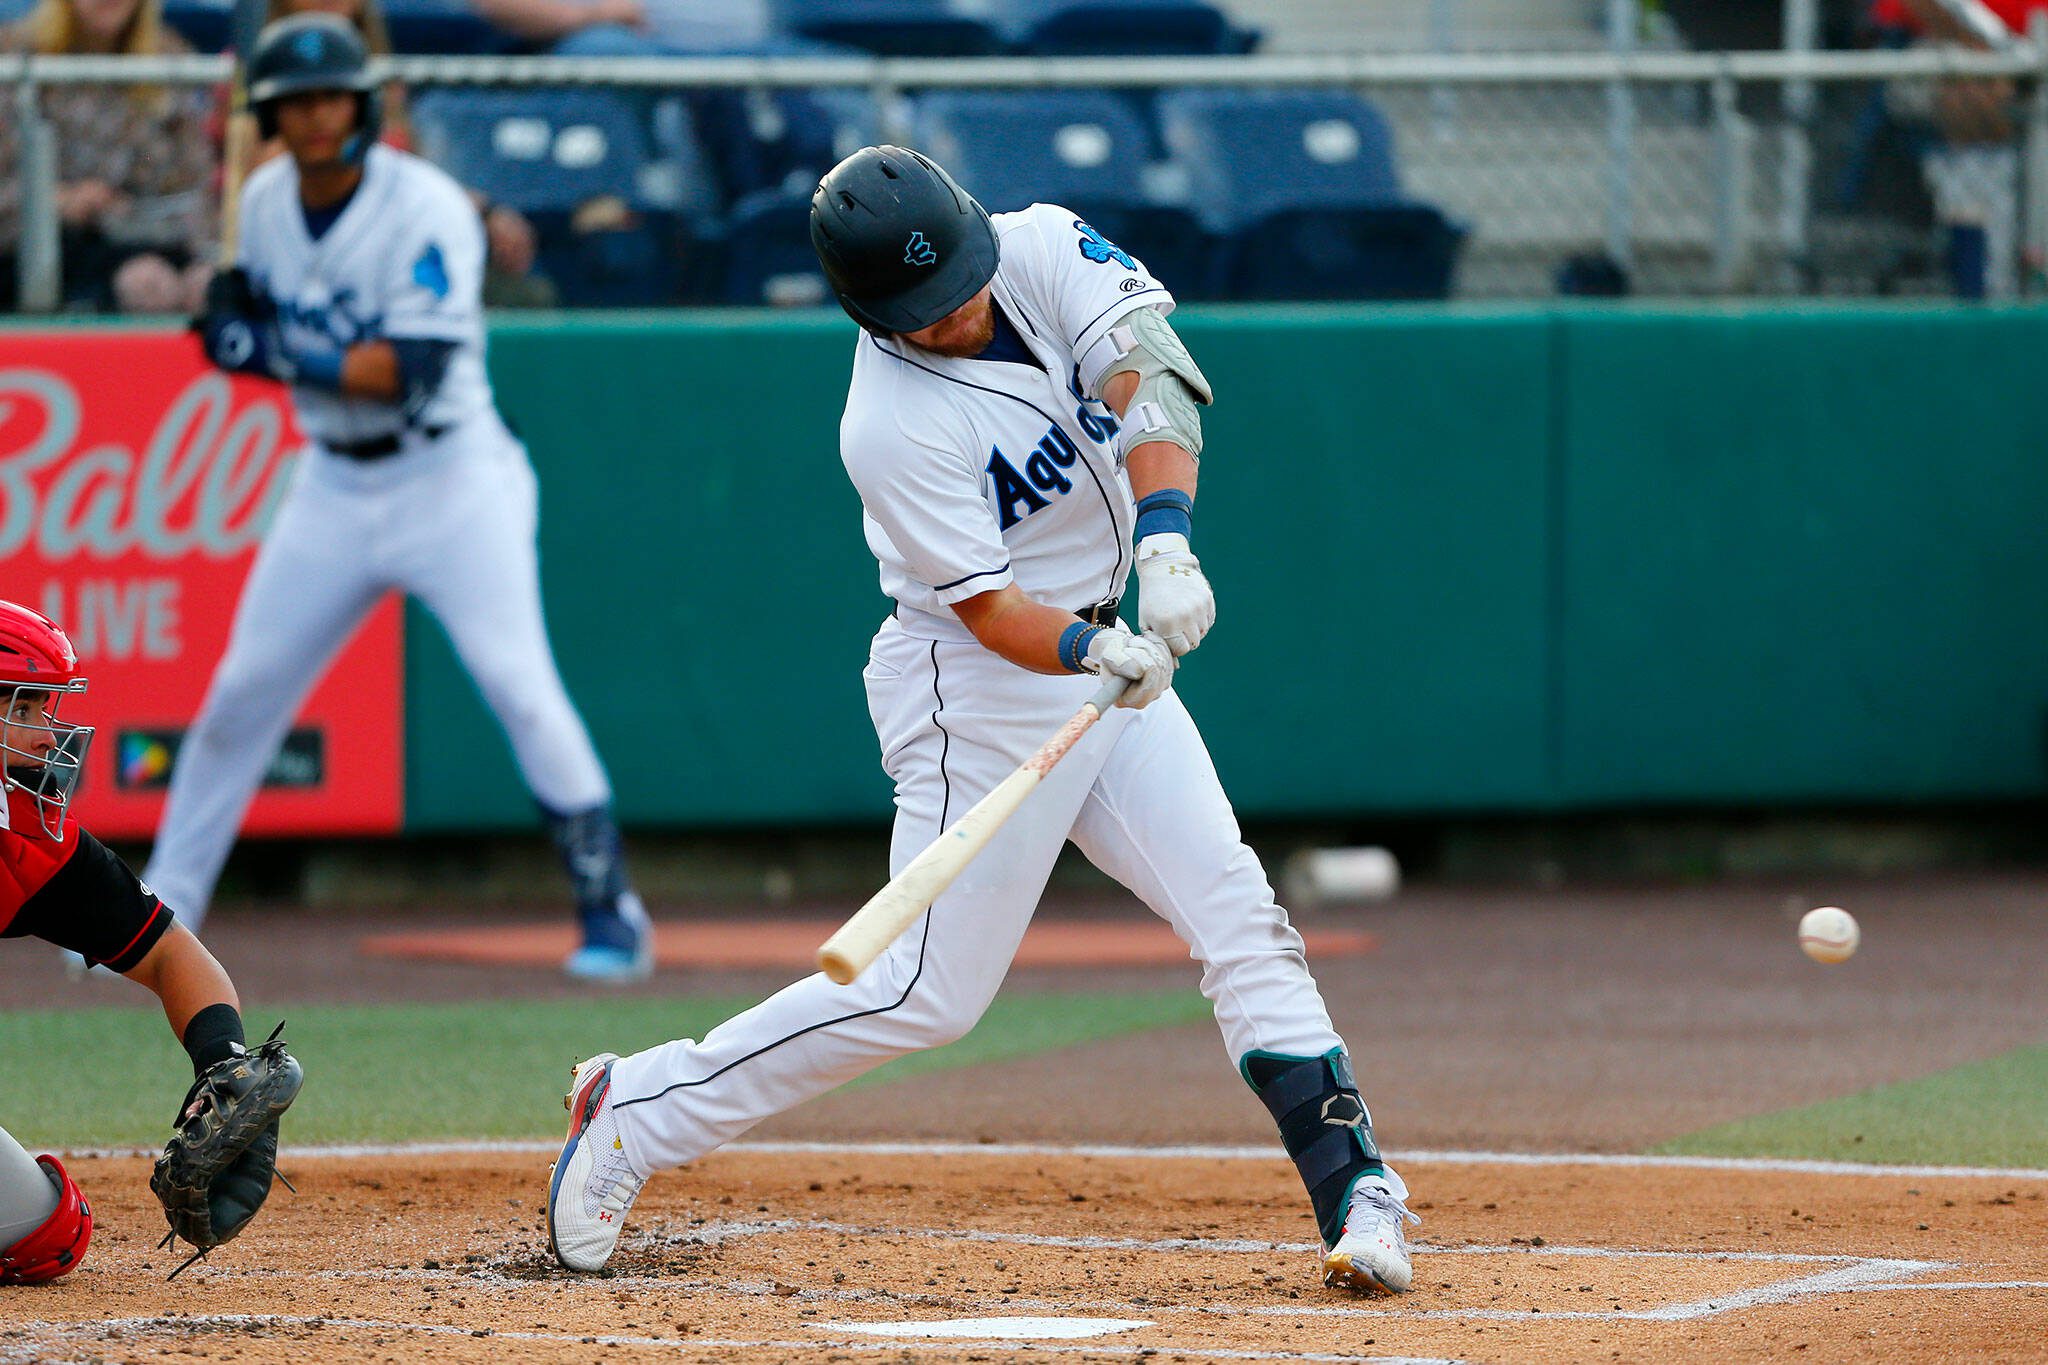 AquaSox infielder Hogan Windish swings at a pitch during a game against the Canadians on June 8 at Funko Field in Everett. (Ryan Berry / The Herald)